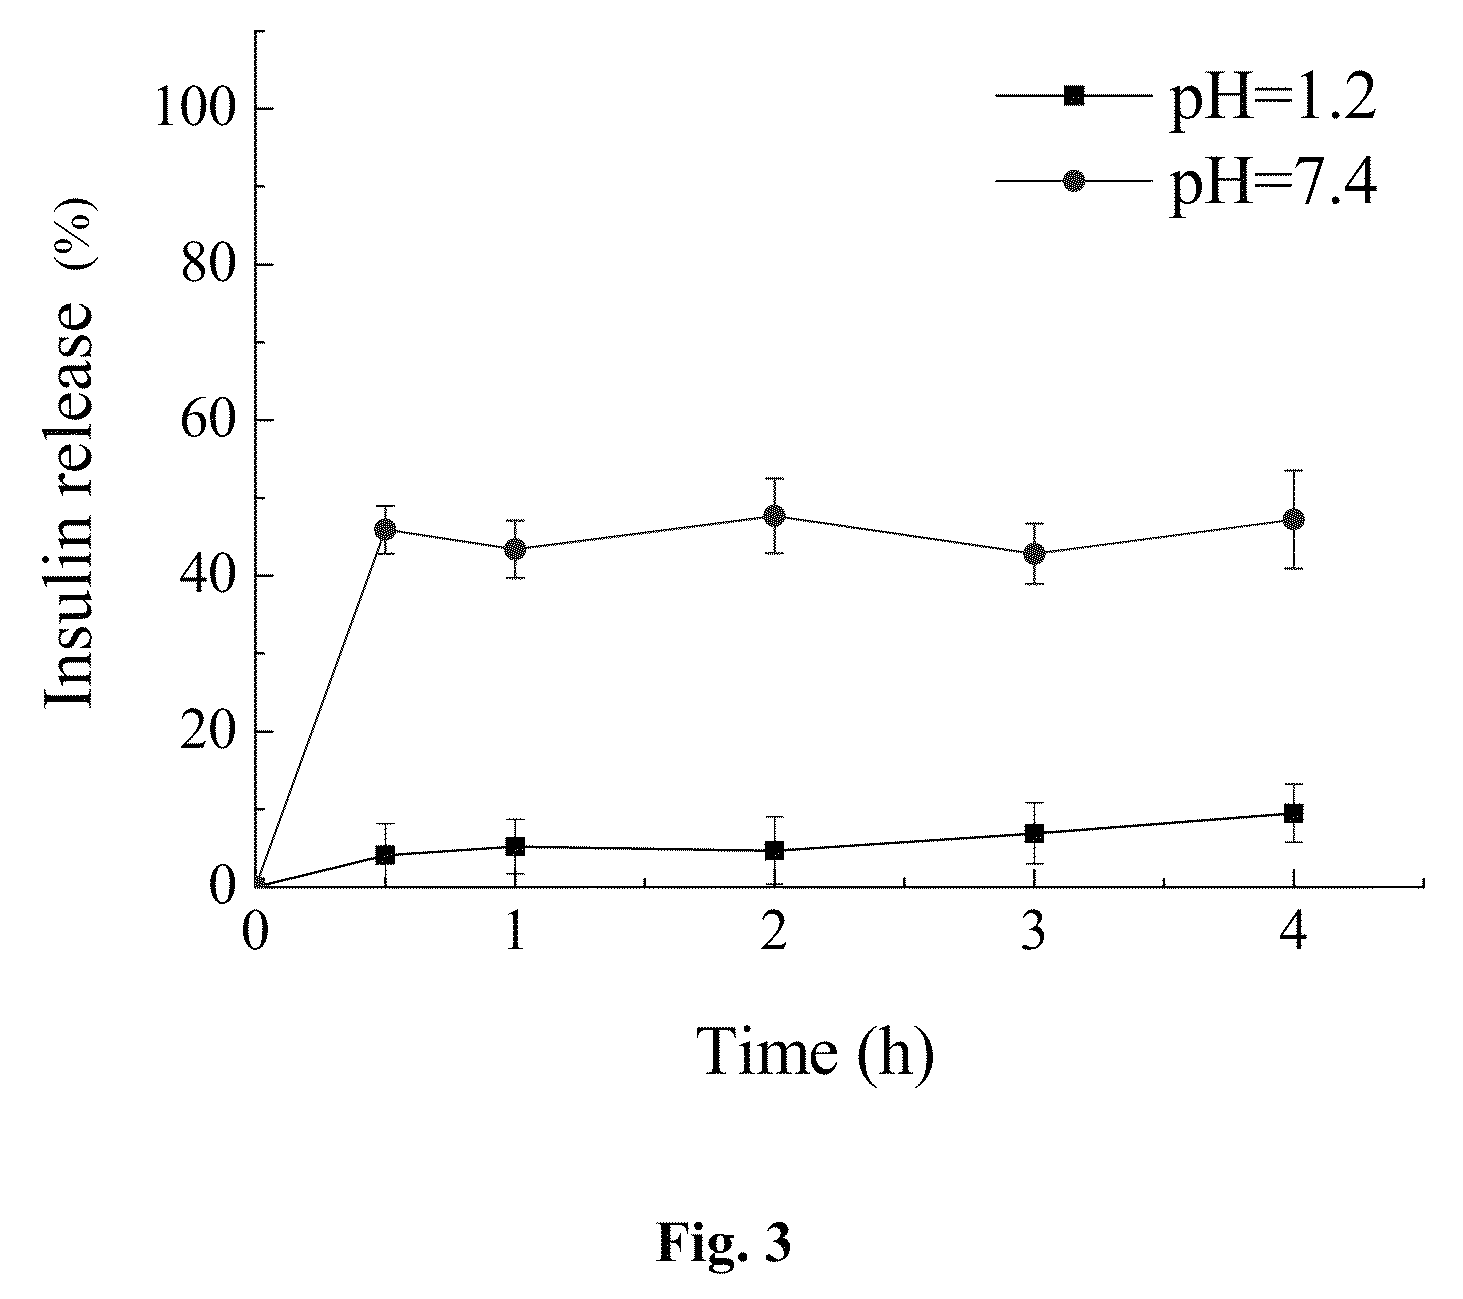 Enteric-coated capsule containing cationic nanoparticles for oral insulin delivery